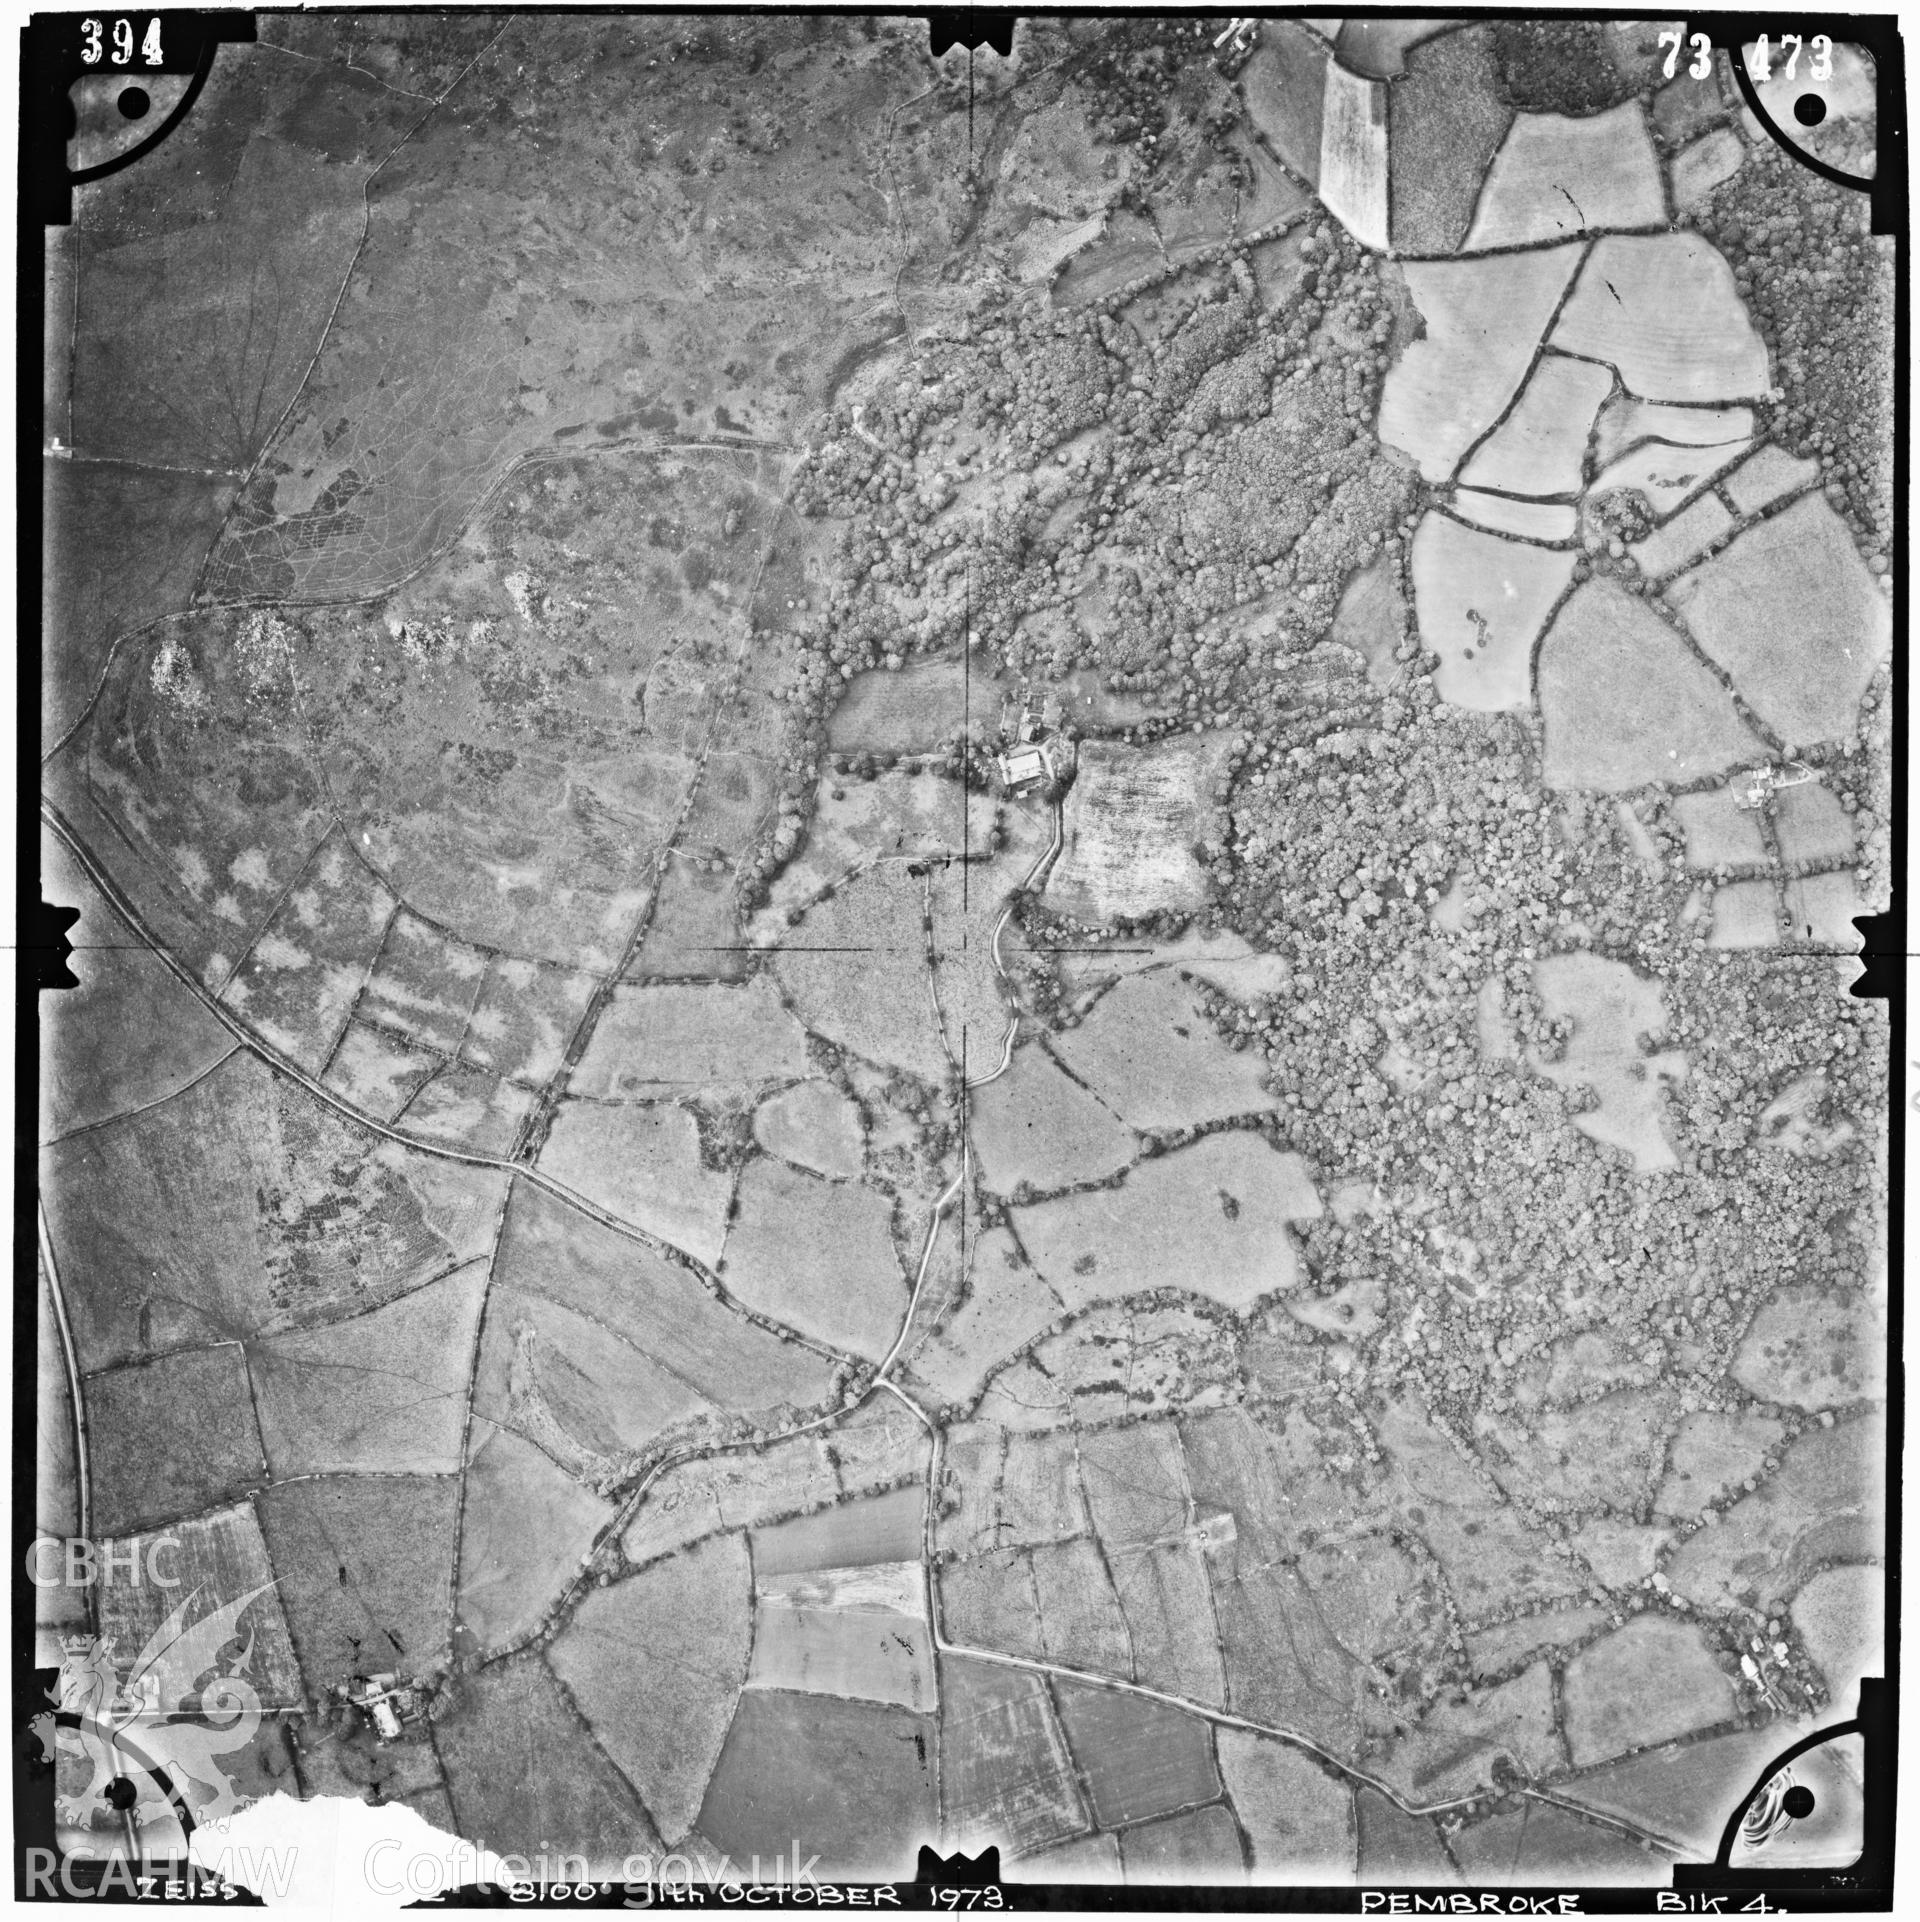 Digitized copy of an aerial photograph showing the area around Pentre Evan Wood near Nevern, taken by Ordnance Survey, 1973.